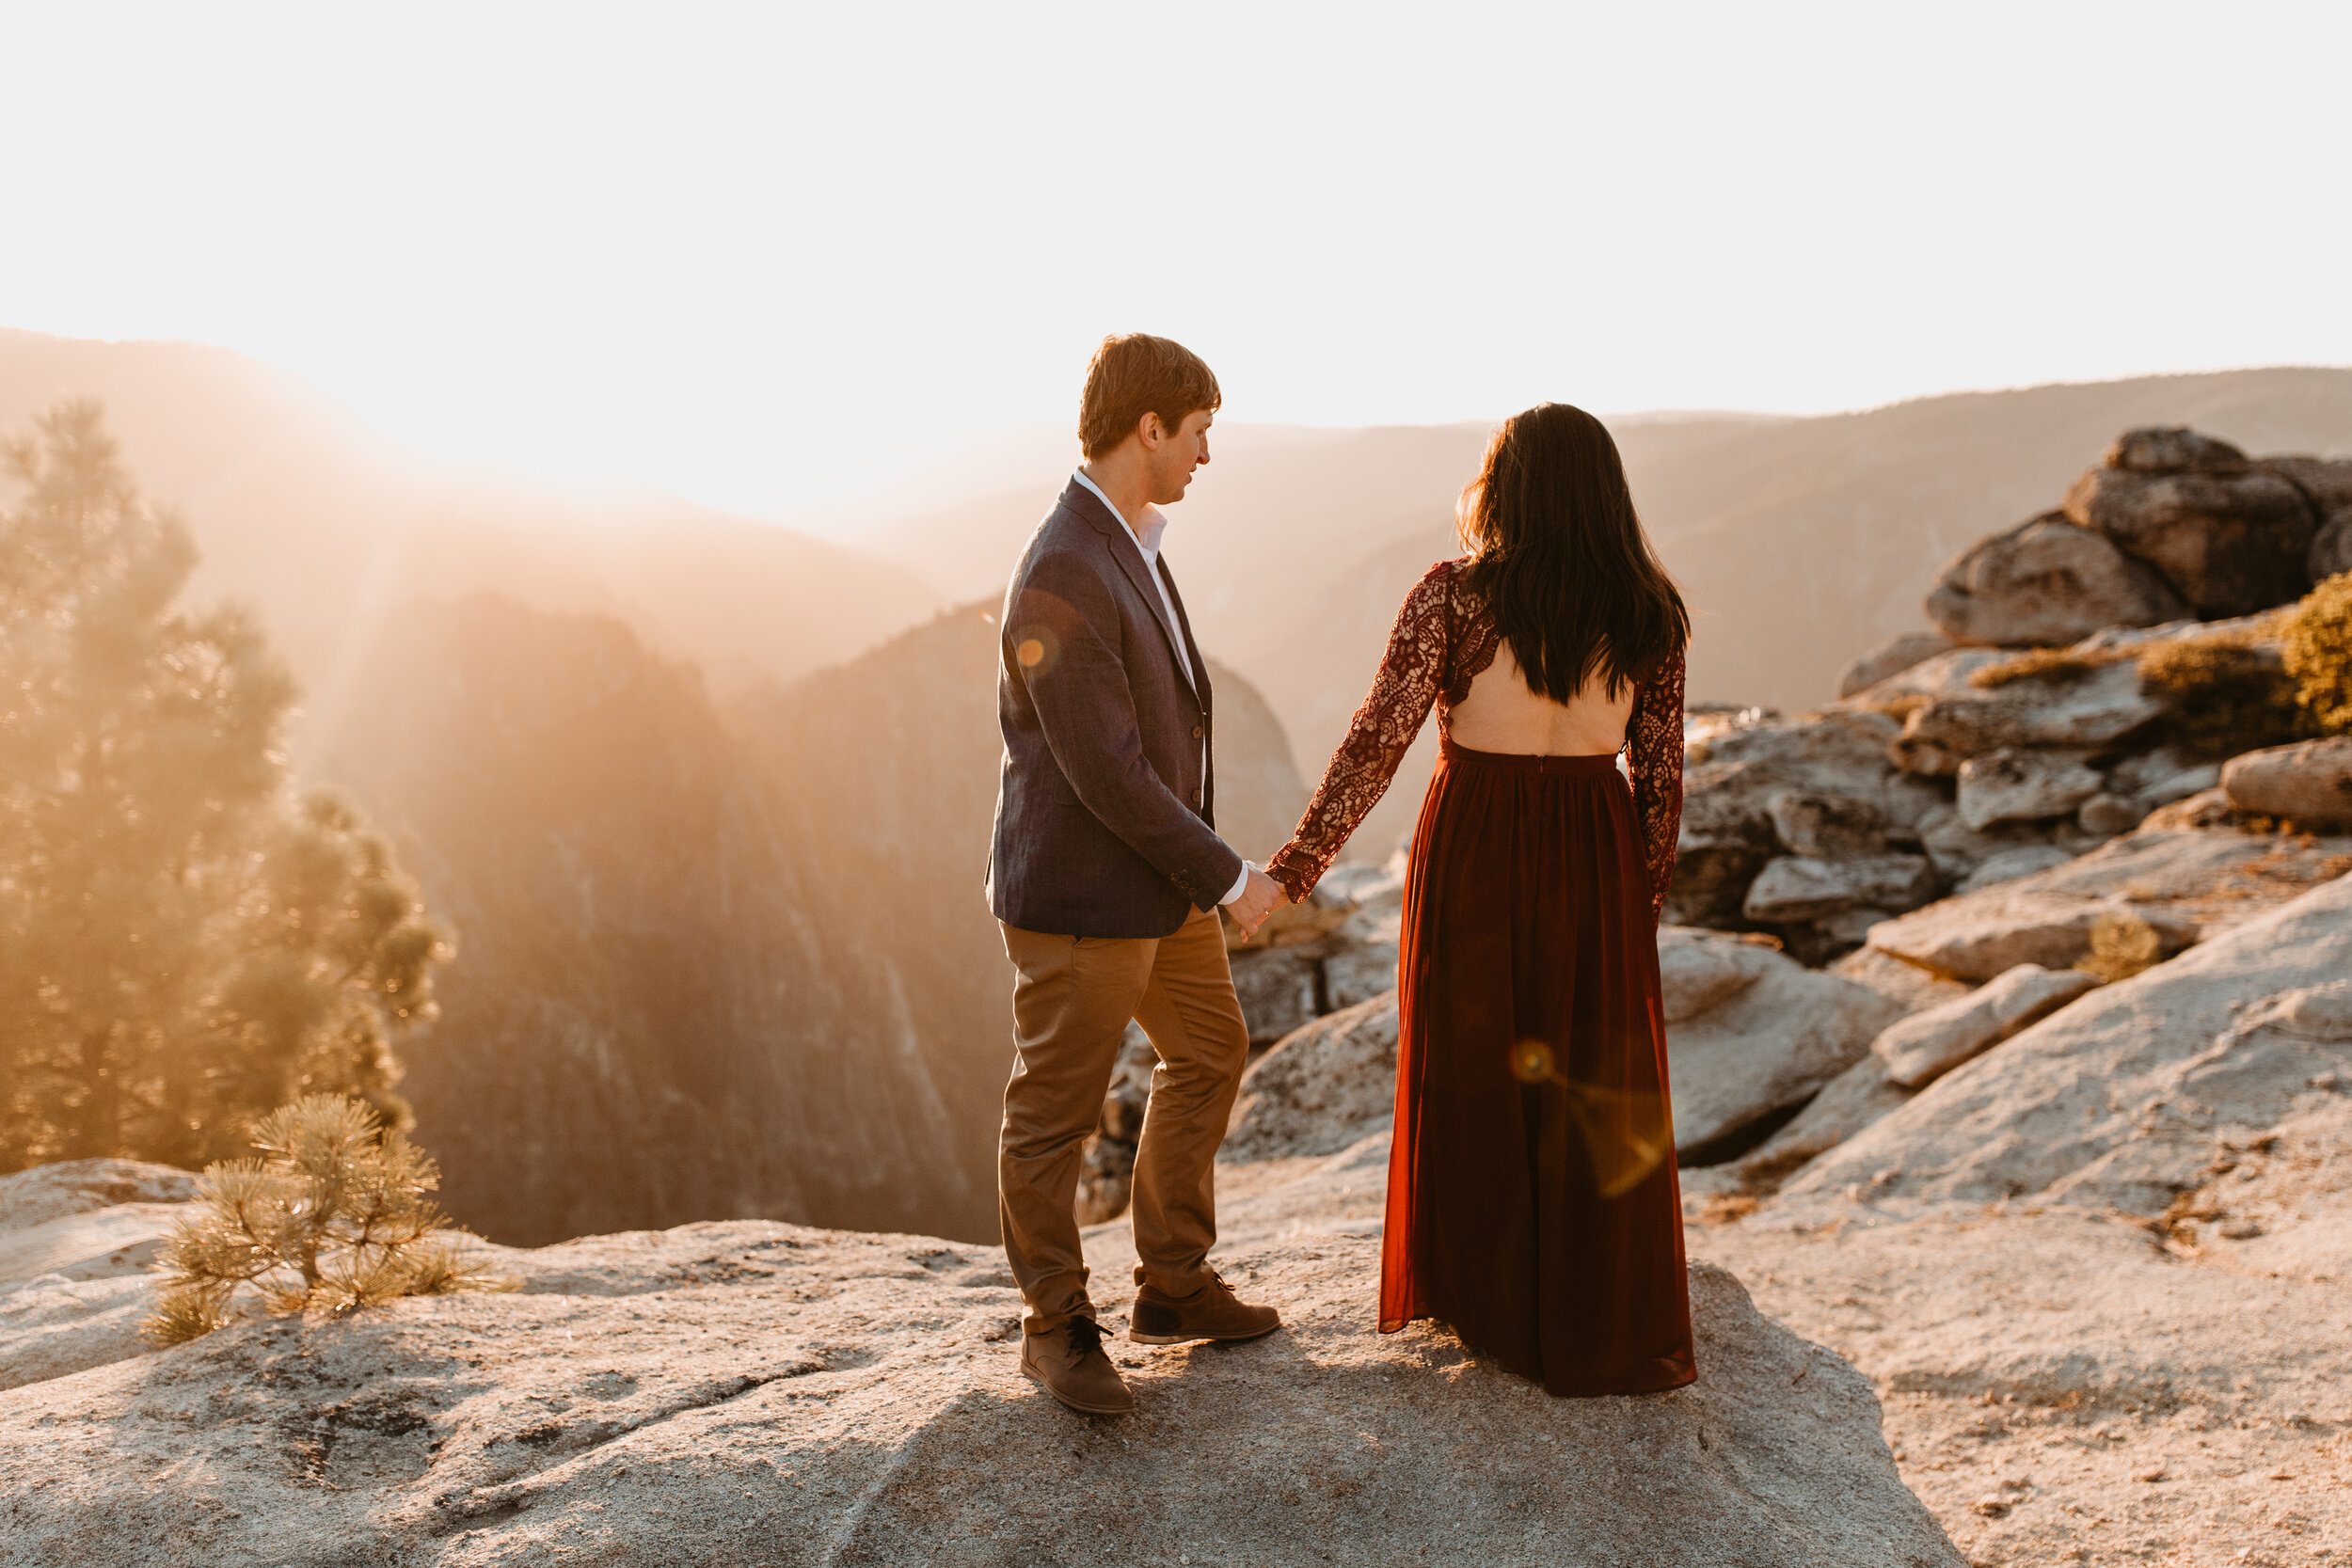 yosemite-national-park-couples-session-at-taft-point-and-yosemite-valley-yosemite-elopement-photographer-nicole-daacke-photography-145.jpg